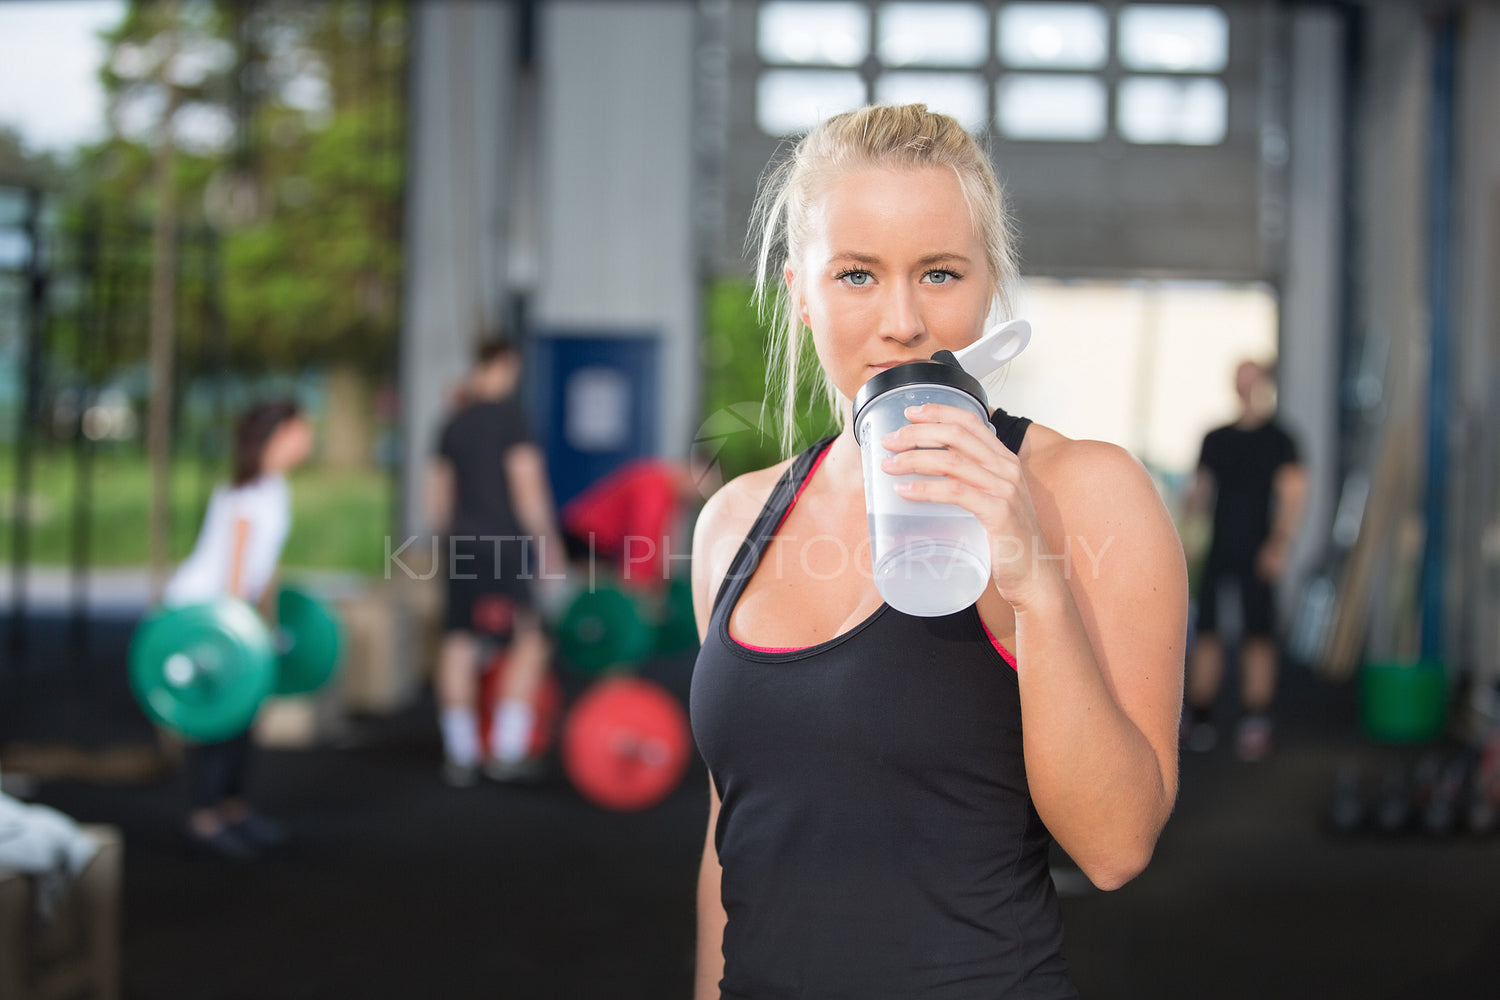 Woman drinking water at fitness gym center